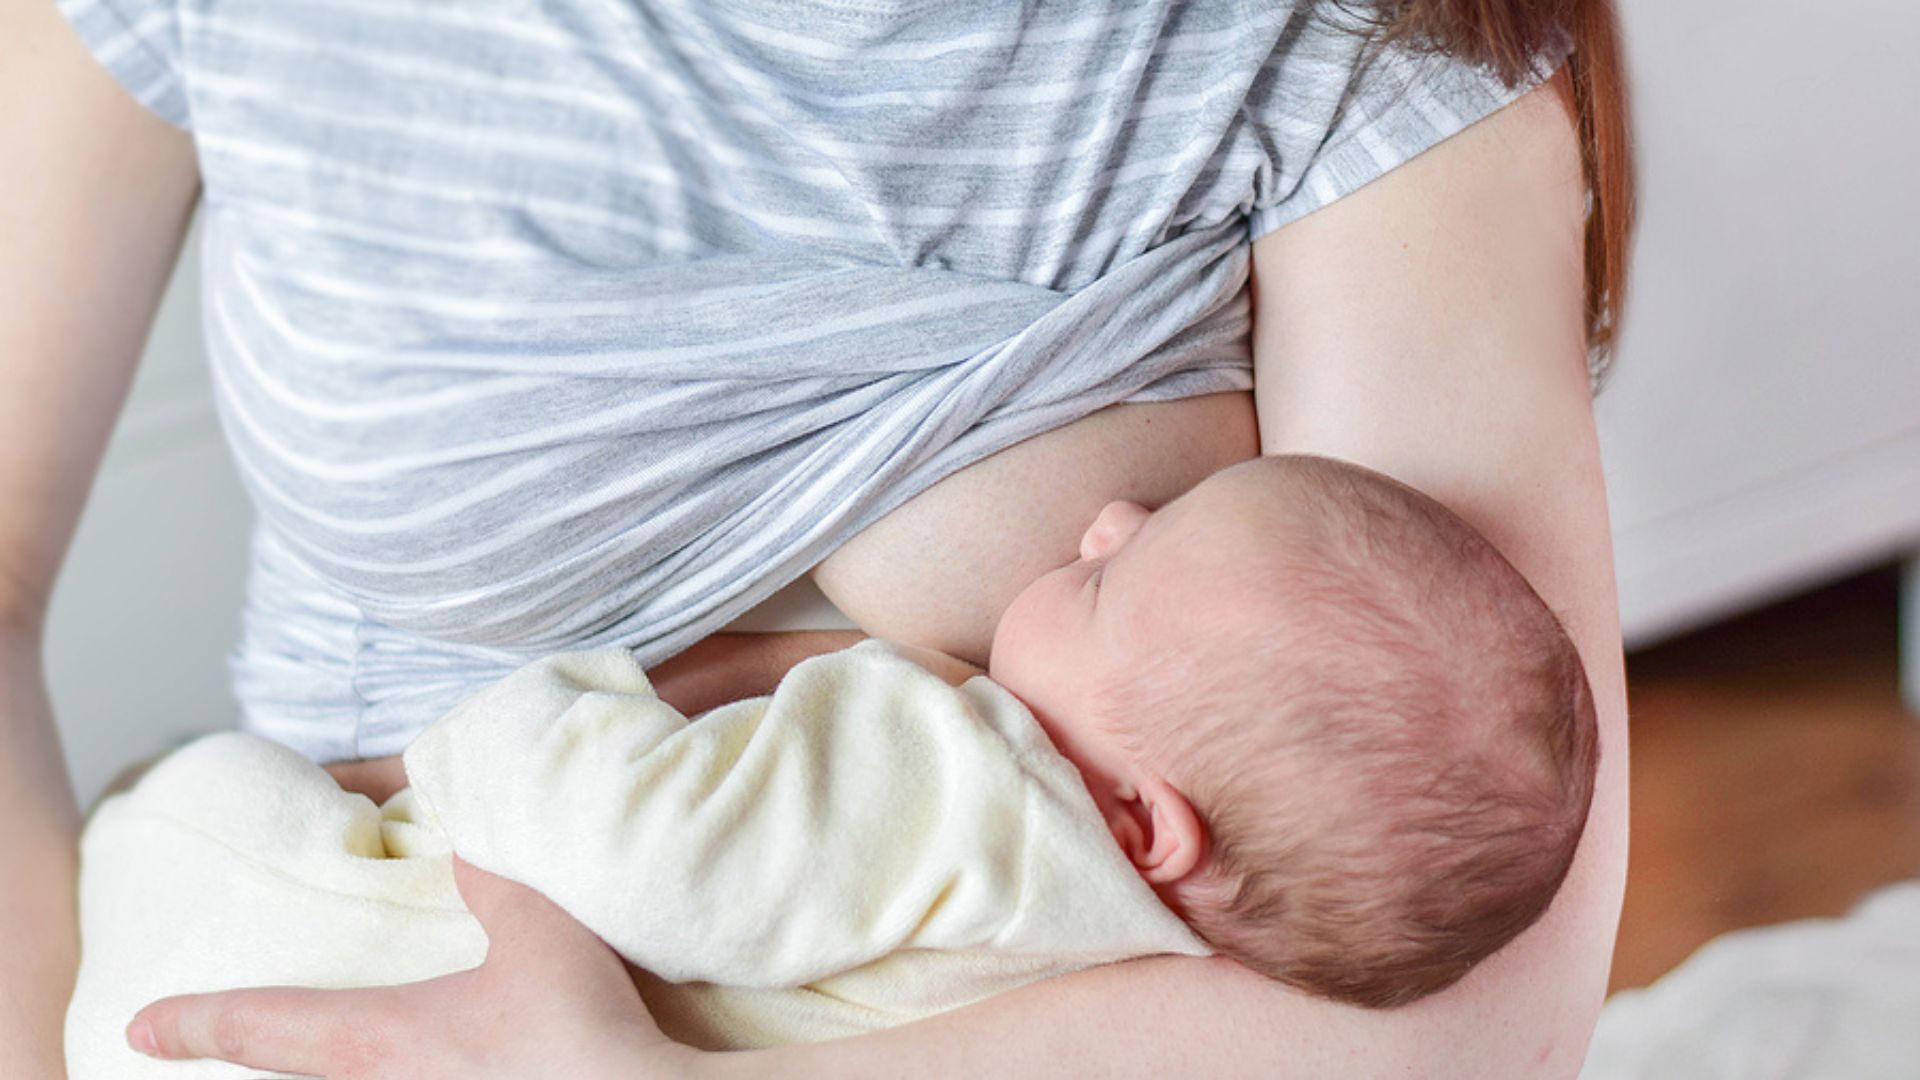 Foods that cause gas when breastfeeding? Information & practical list